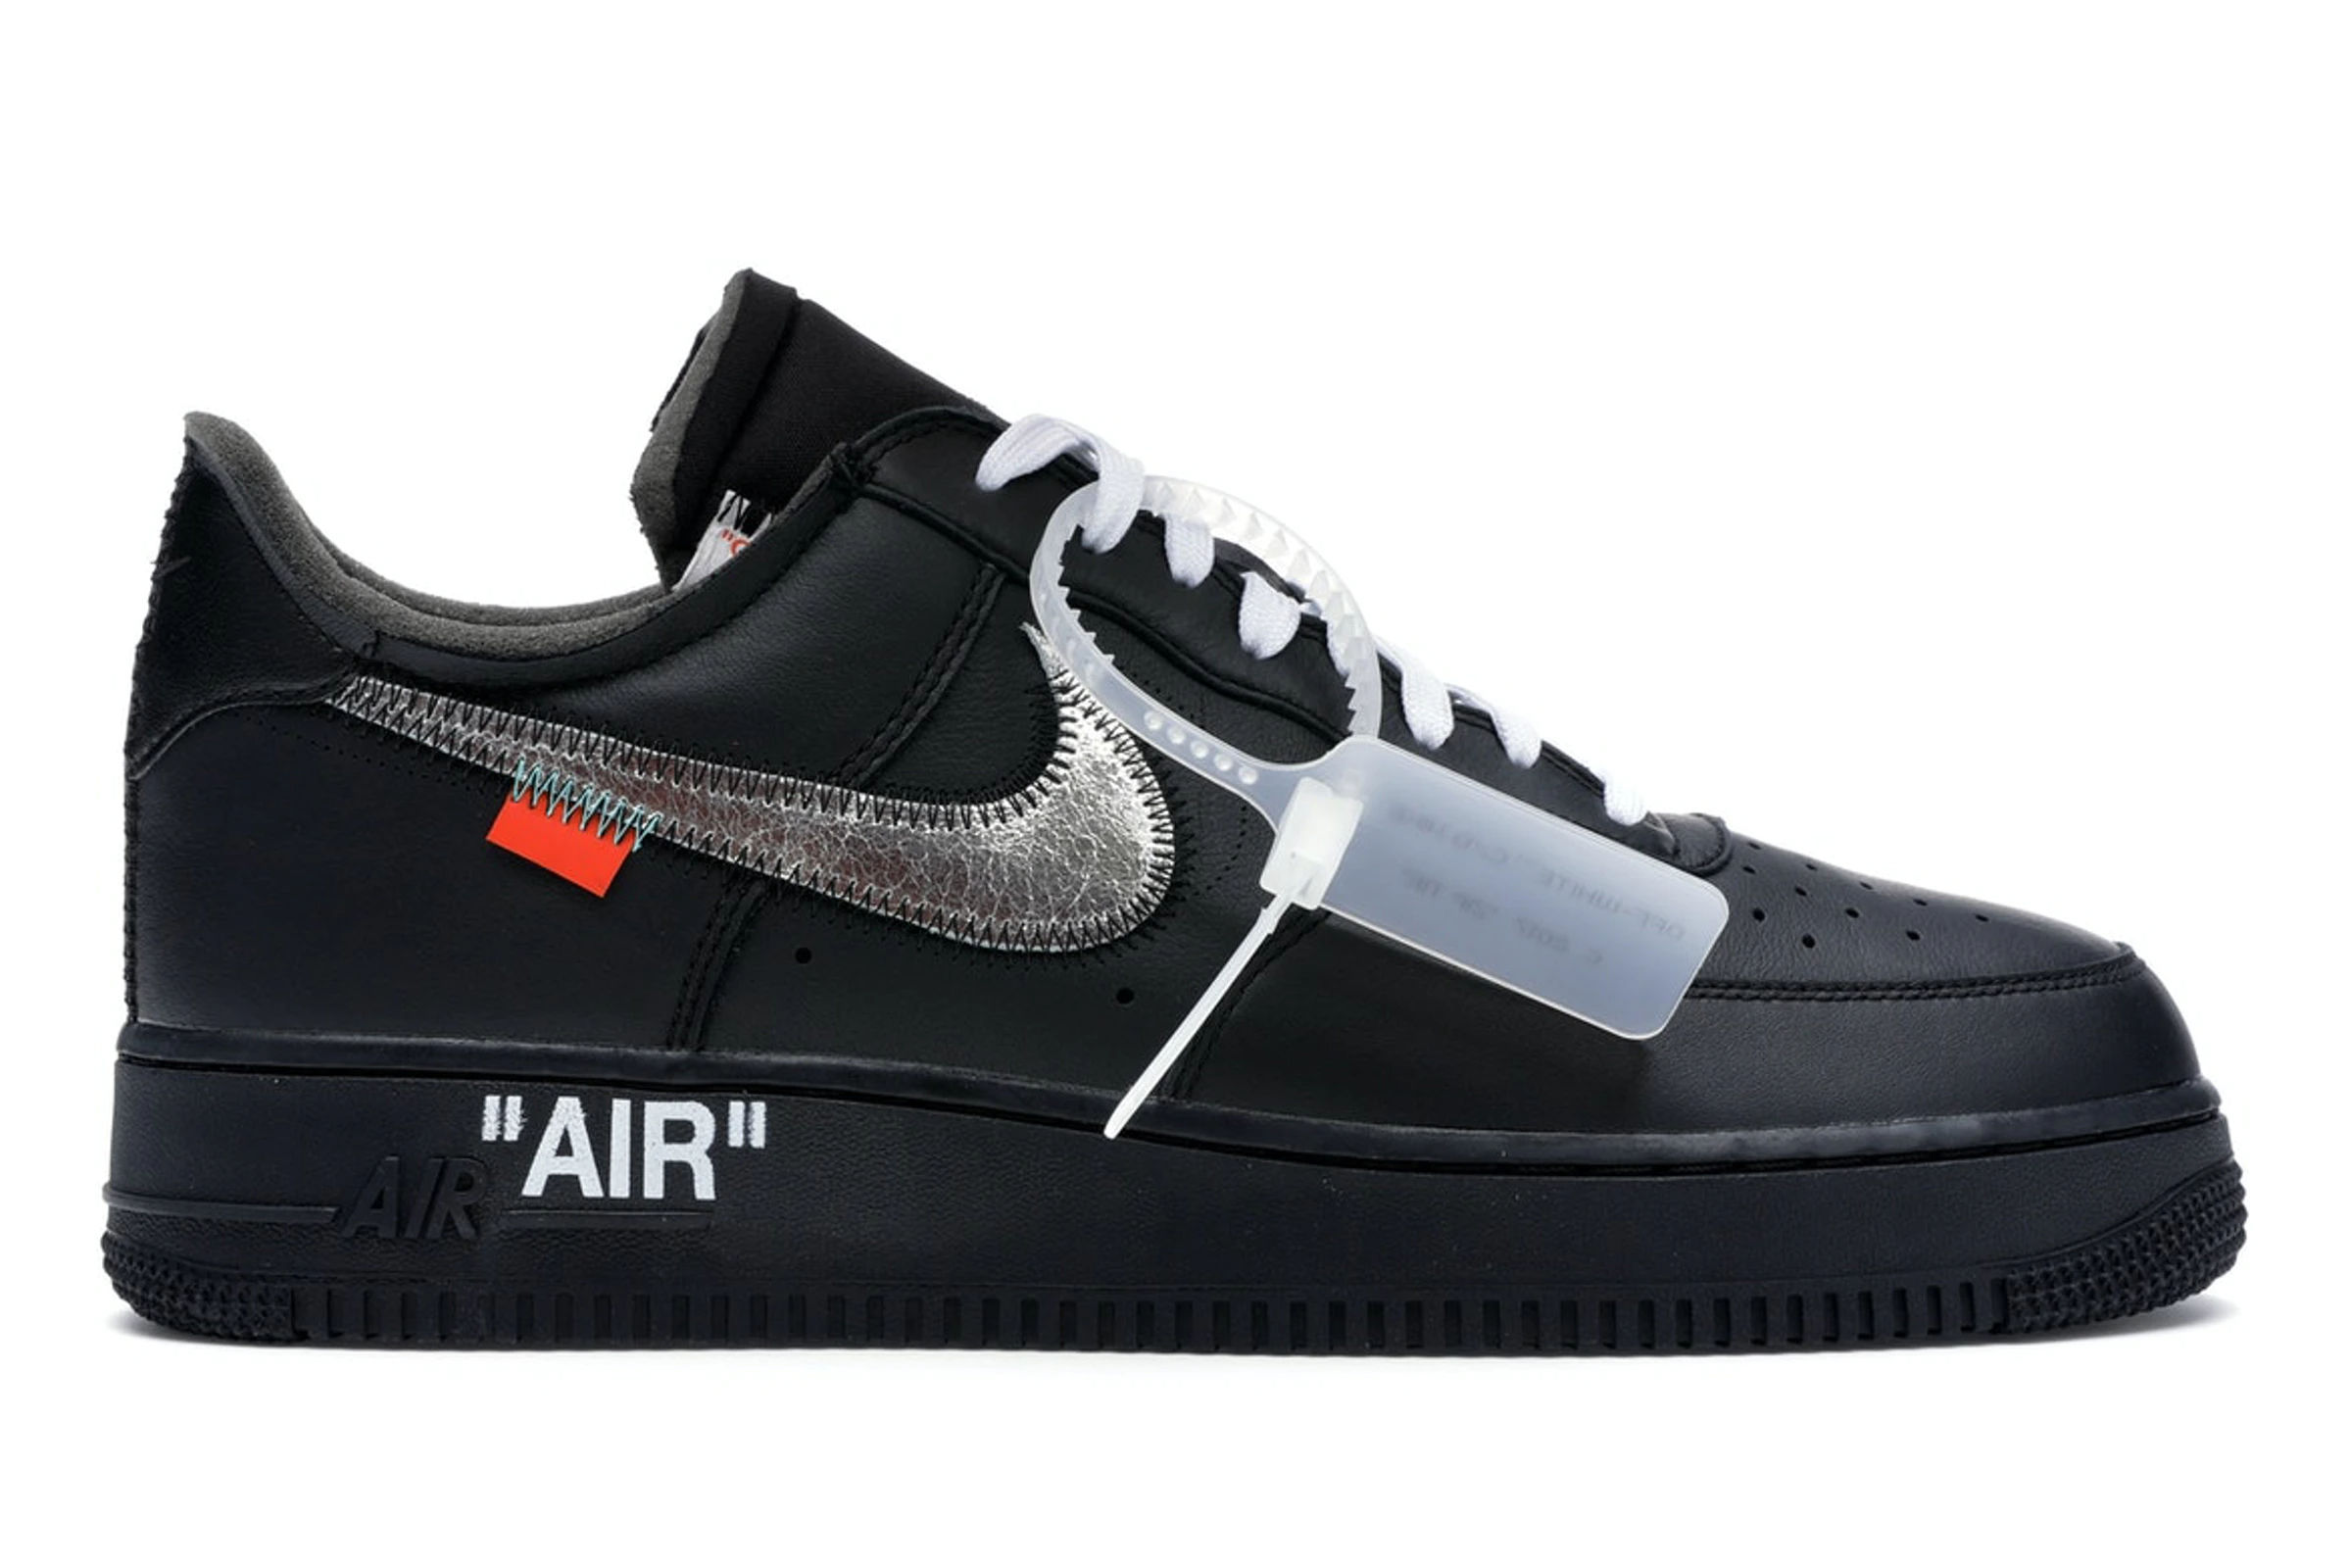 Off-White x MoMA x Nike Air Force 1 by Virgil Abloh